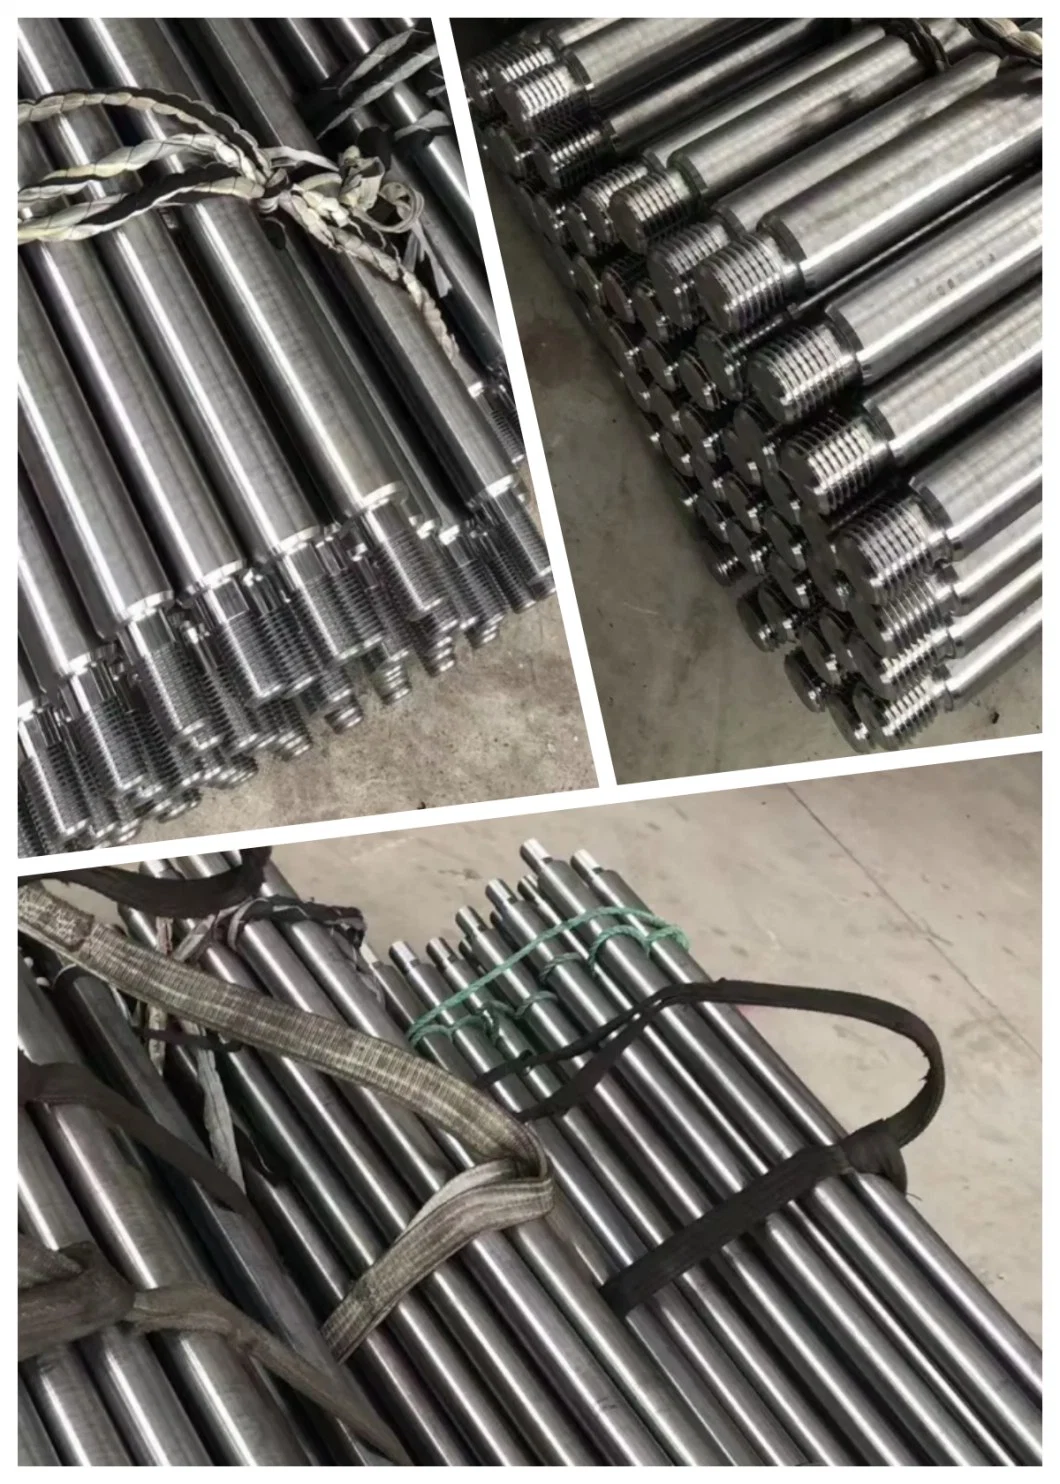 Ck45 S45c SAE1045 4140 4340 Carbon Steel Rod Hard Chrome Plated Mild Steel Shaft Forged Bright Round Bar Hydraulic Cylinder Piston Rod Shock Absorber